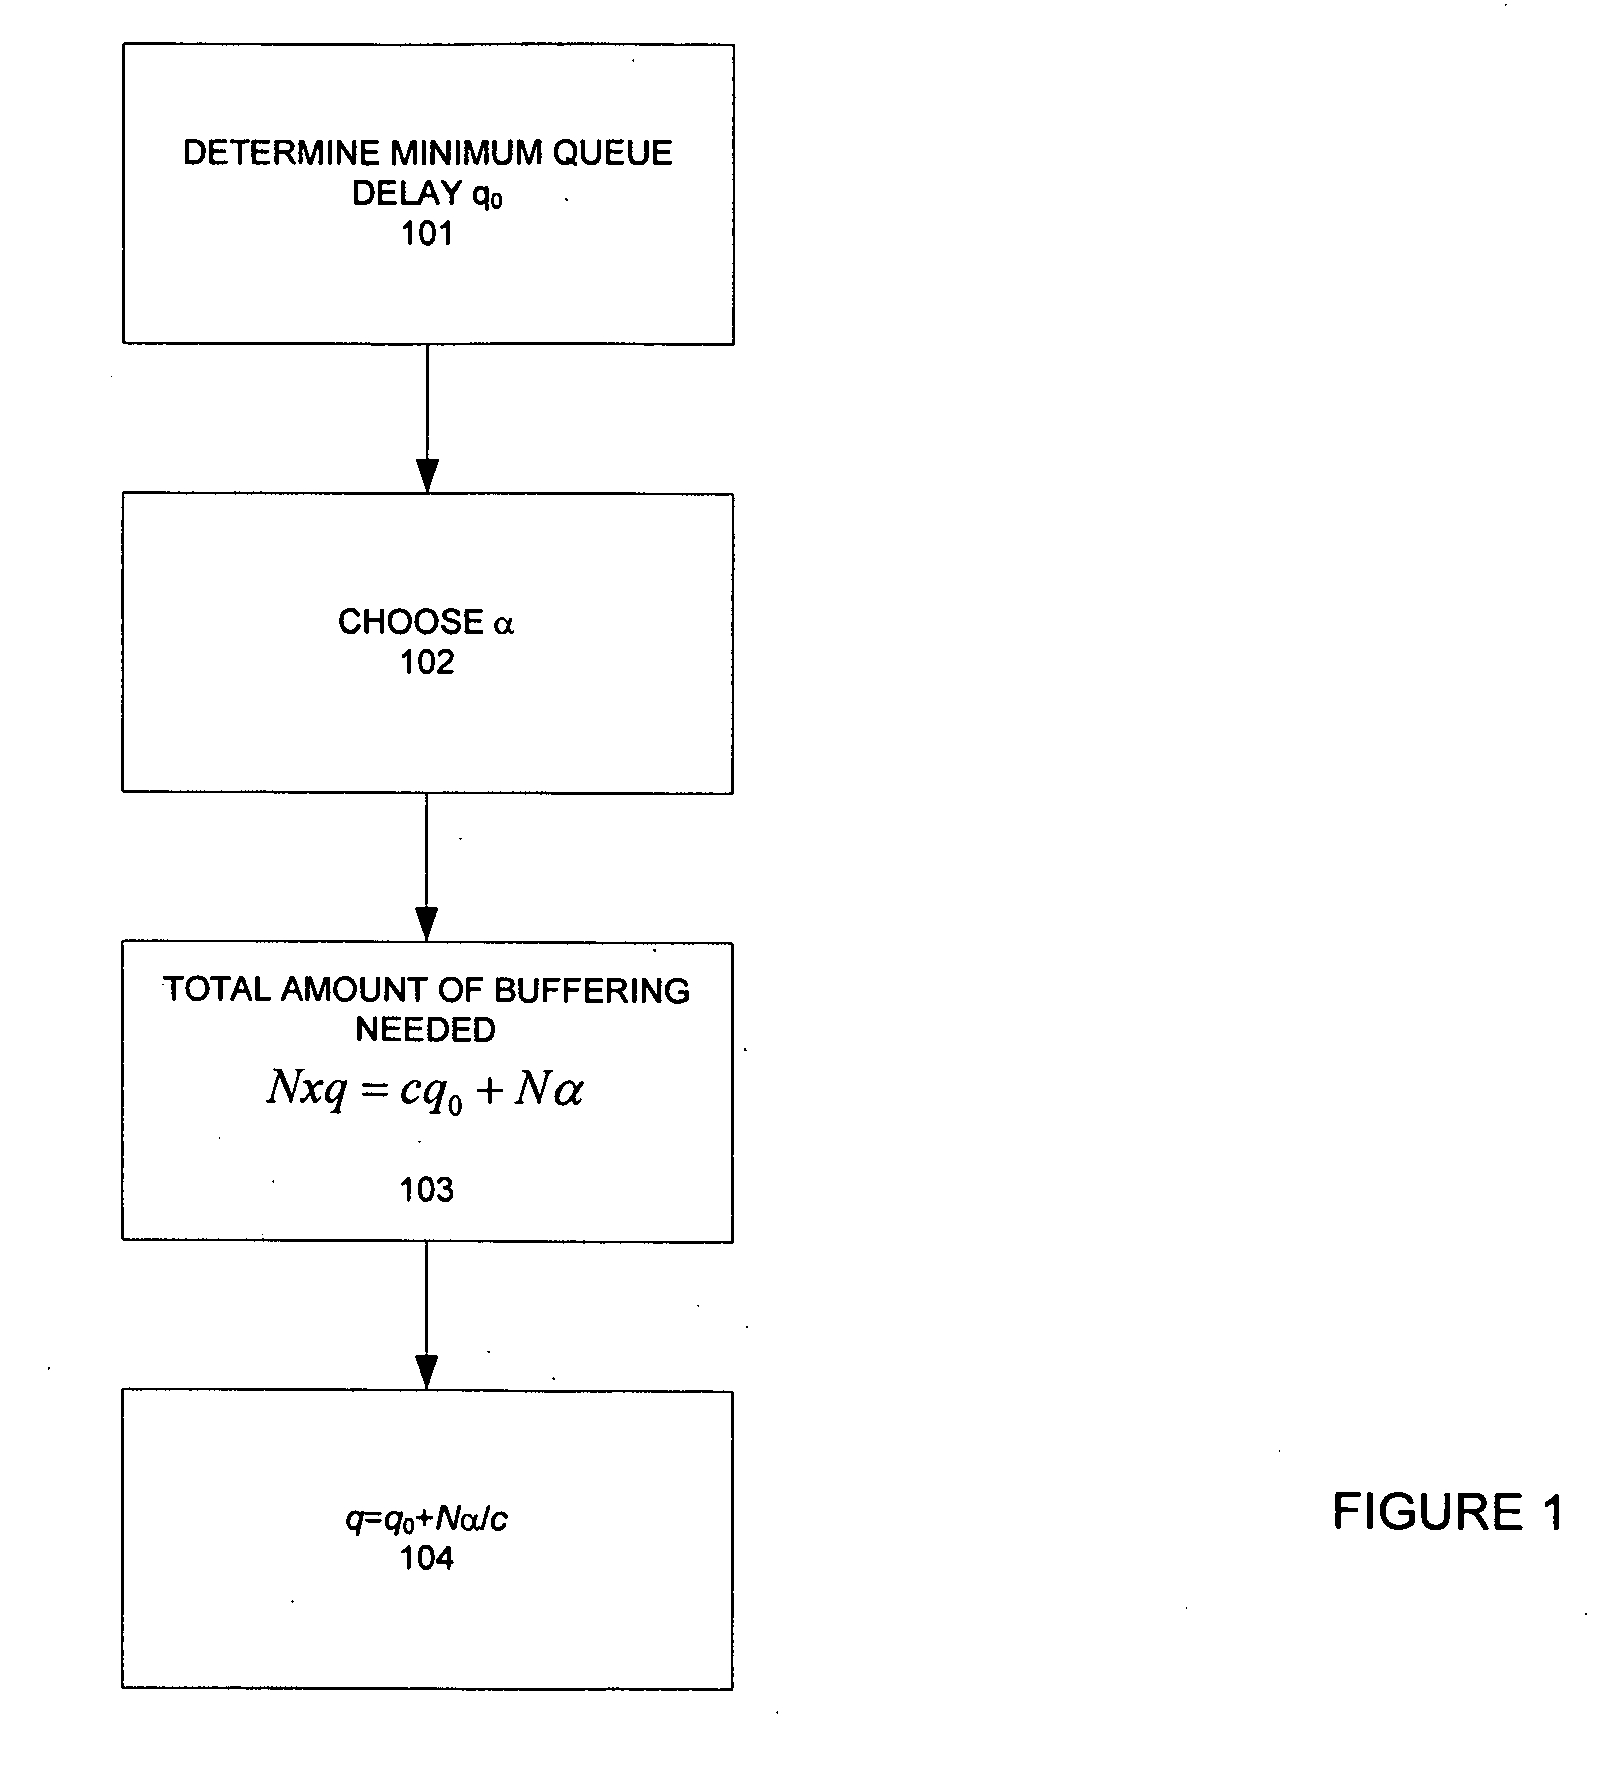 Method and apparatus for network congestion control using queue control and one-way delay measurements